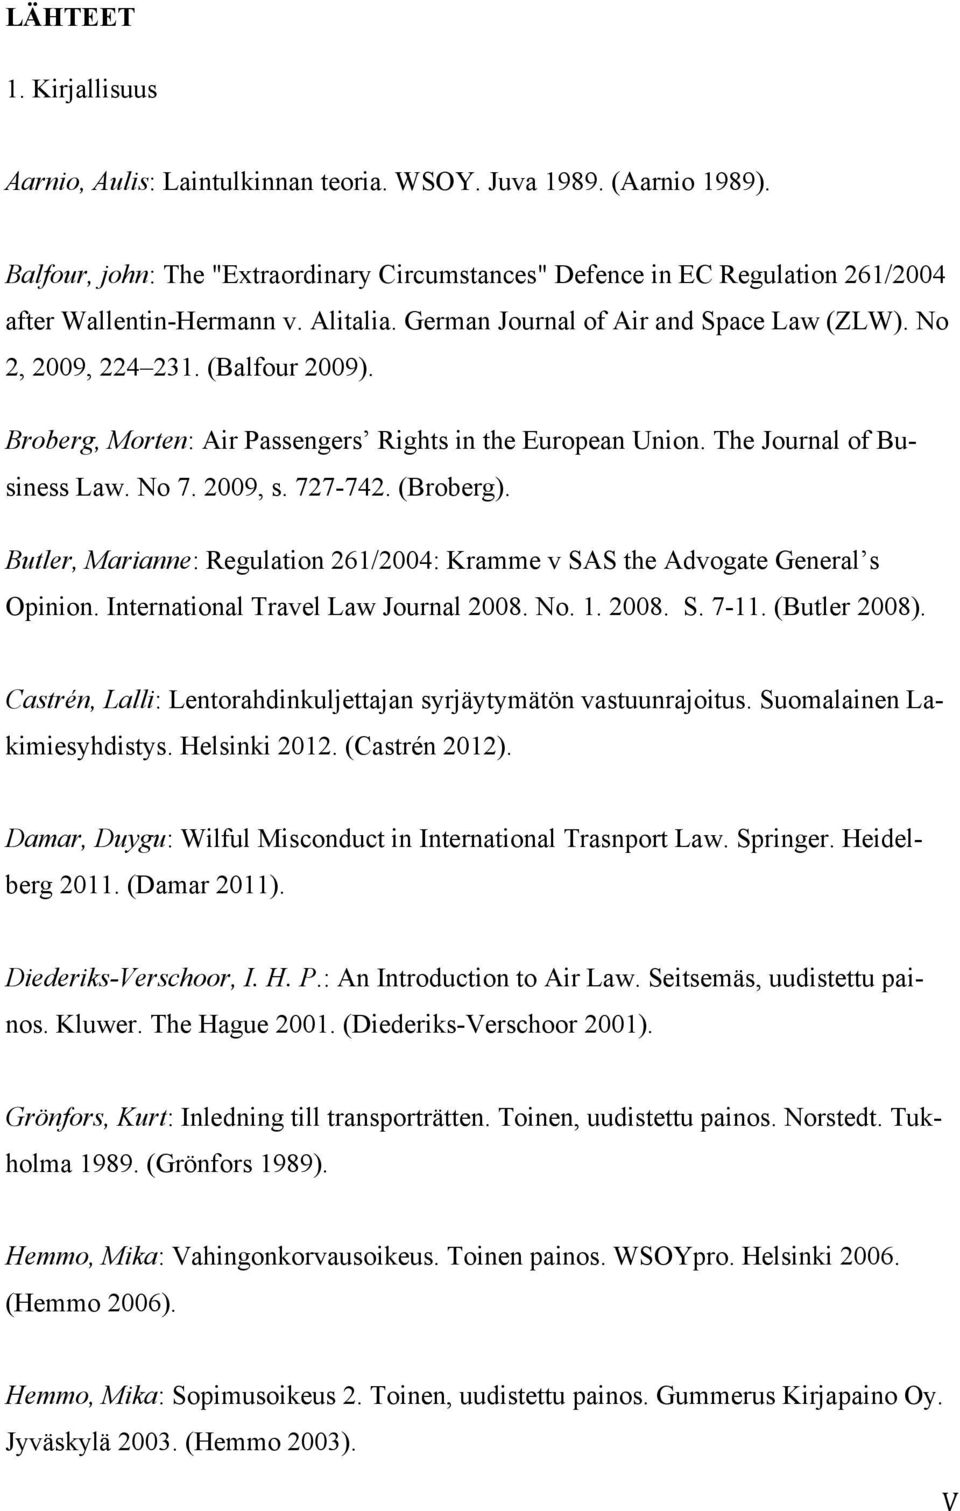 Broberg, Morten: Air Passengers Rights in the European Union. The Journal of Business Law. No 7. 2009, s. 727-742. (Broberg).